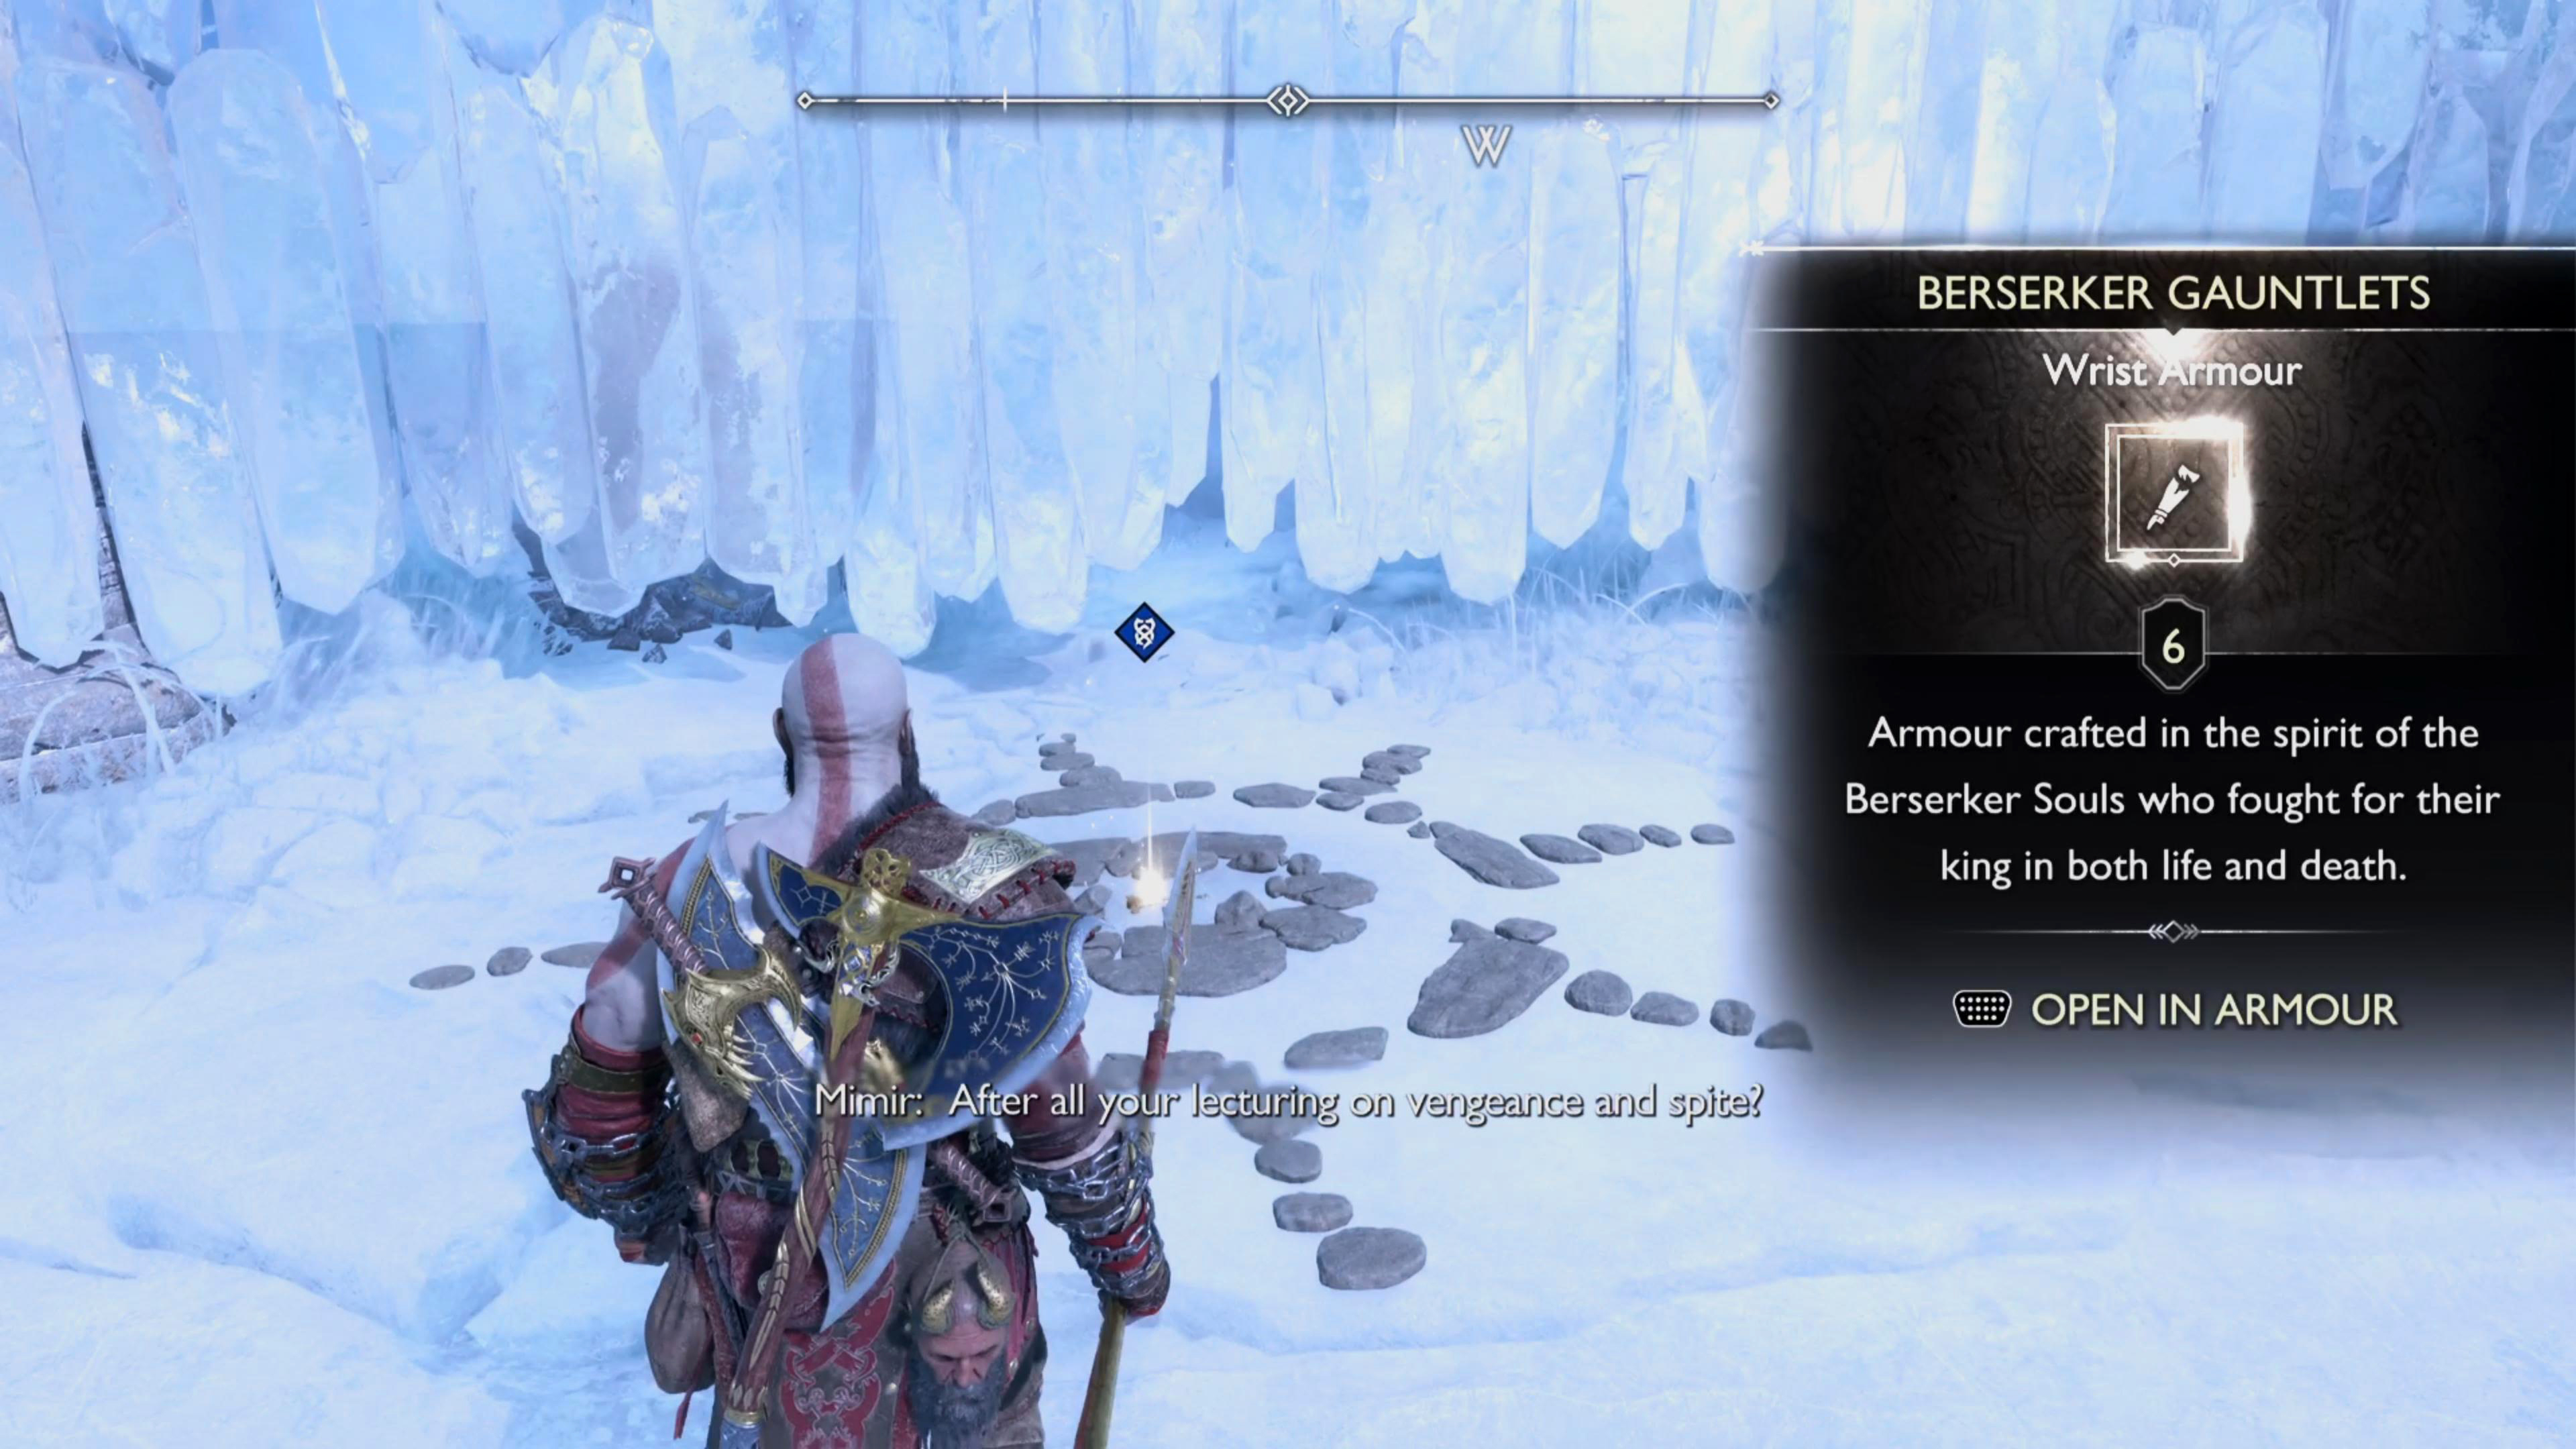 Defeating Skjothendi will reward you with the last part of the Berserker Armor among resources.